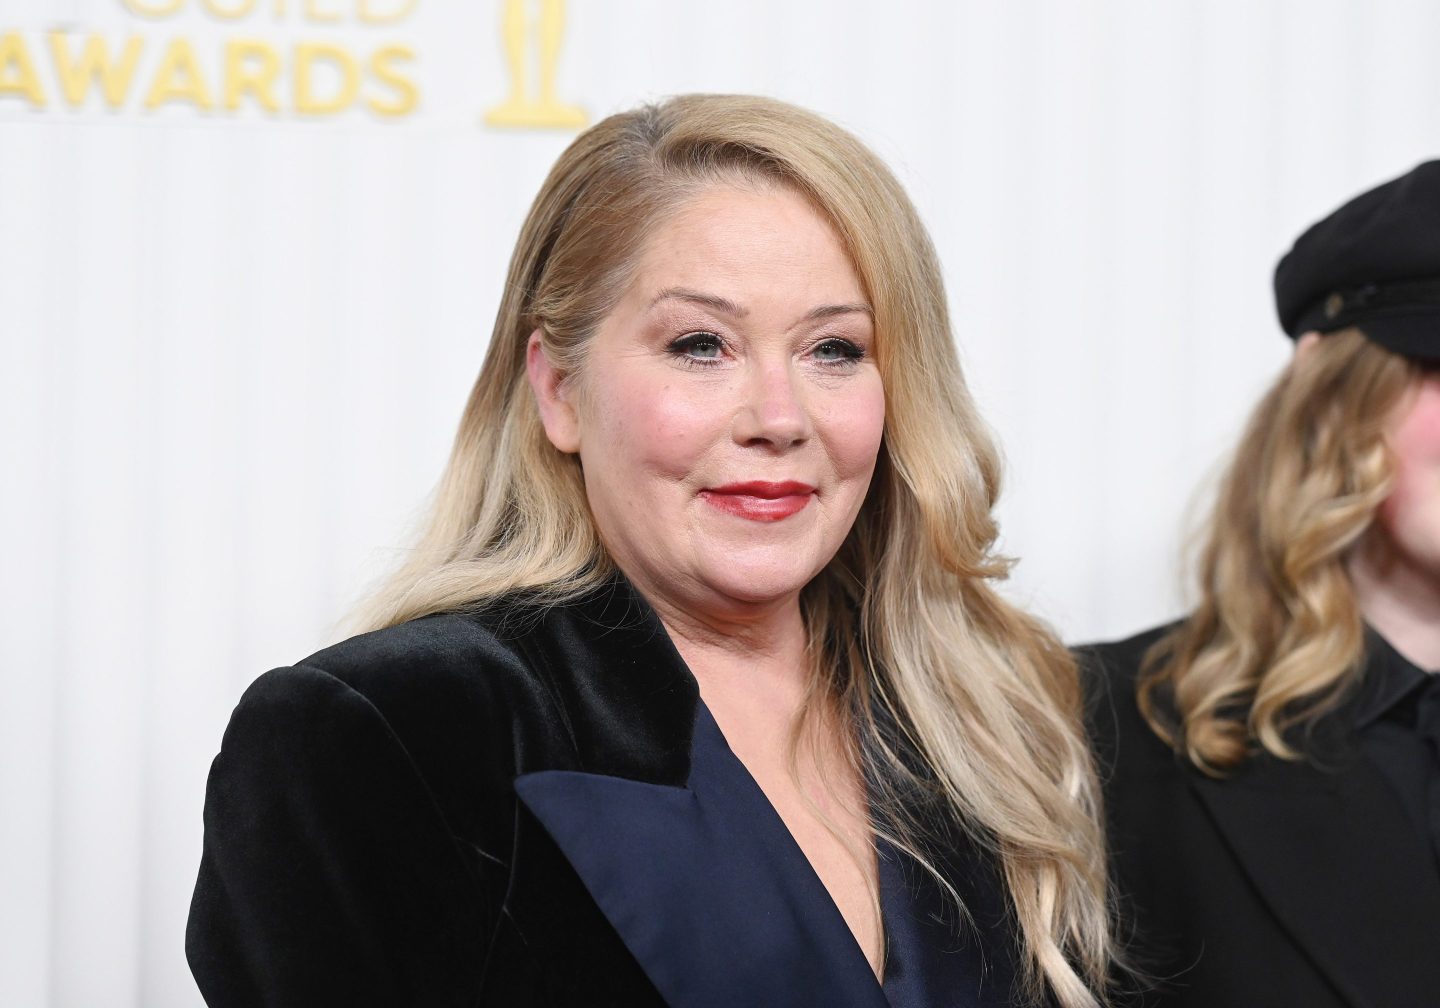 Christina Applegate at the 29th Annual Screen Actors Guild Awards on Feb. 26, 2023 in Los Angeles.